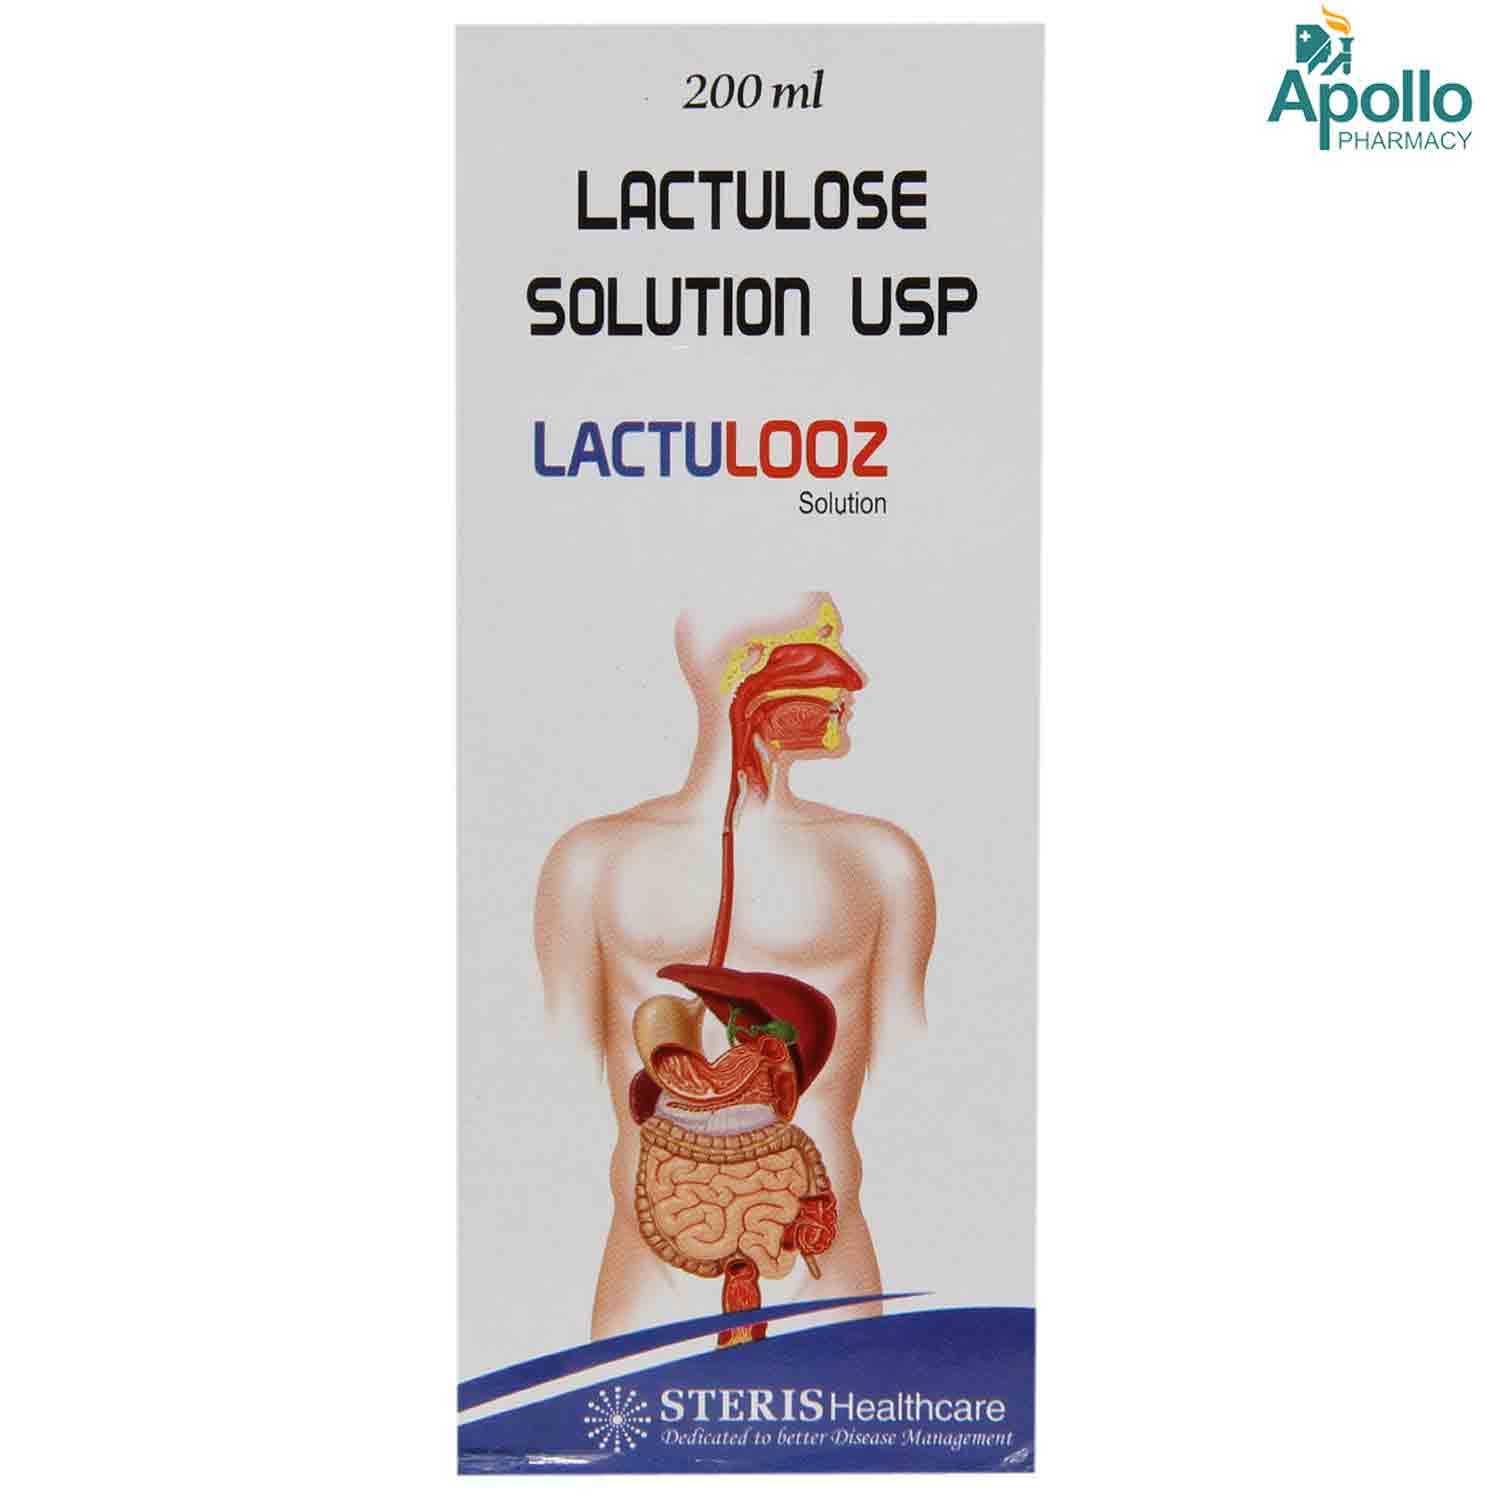 Lactulooz Solution 200 ml, Pack of 1 SOLUTION